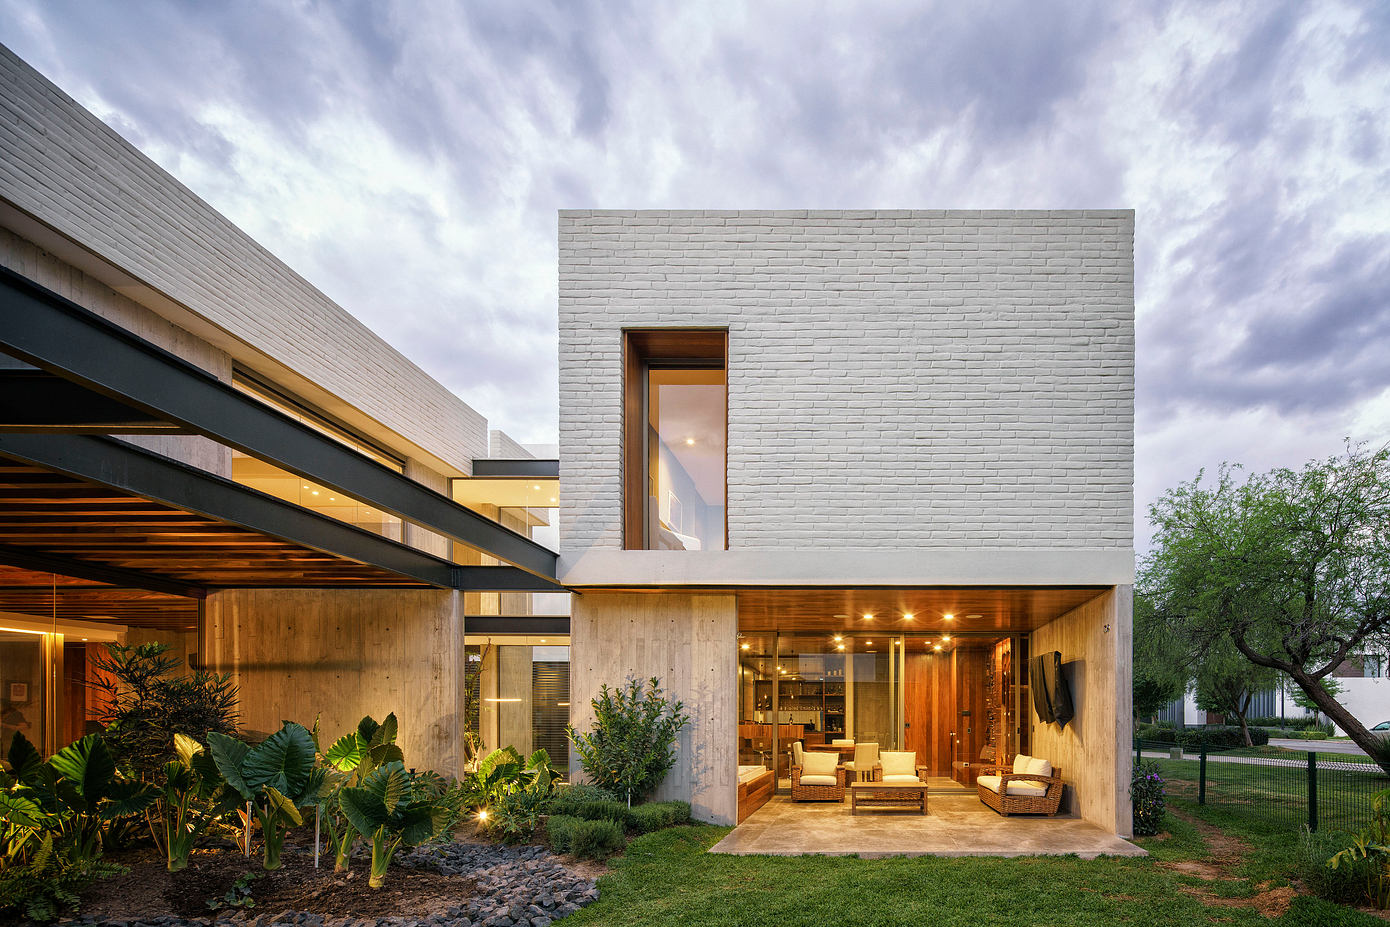 Casa CX3: Sustainable House Design by LM Arkylab in Mexico